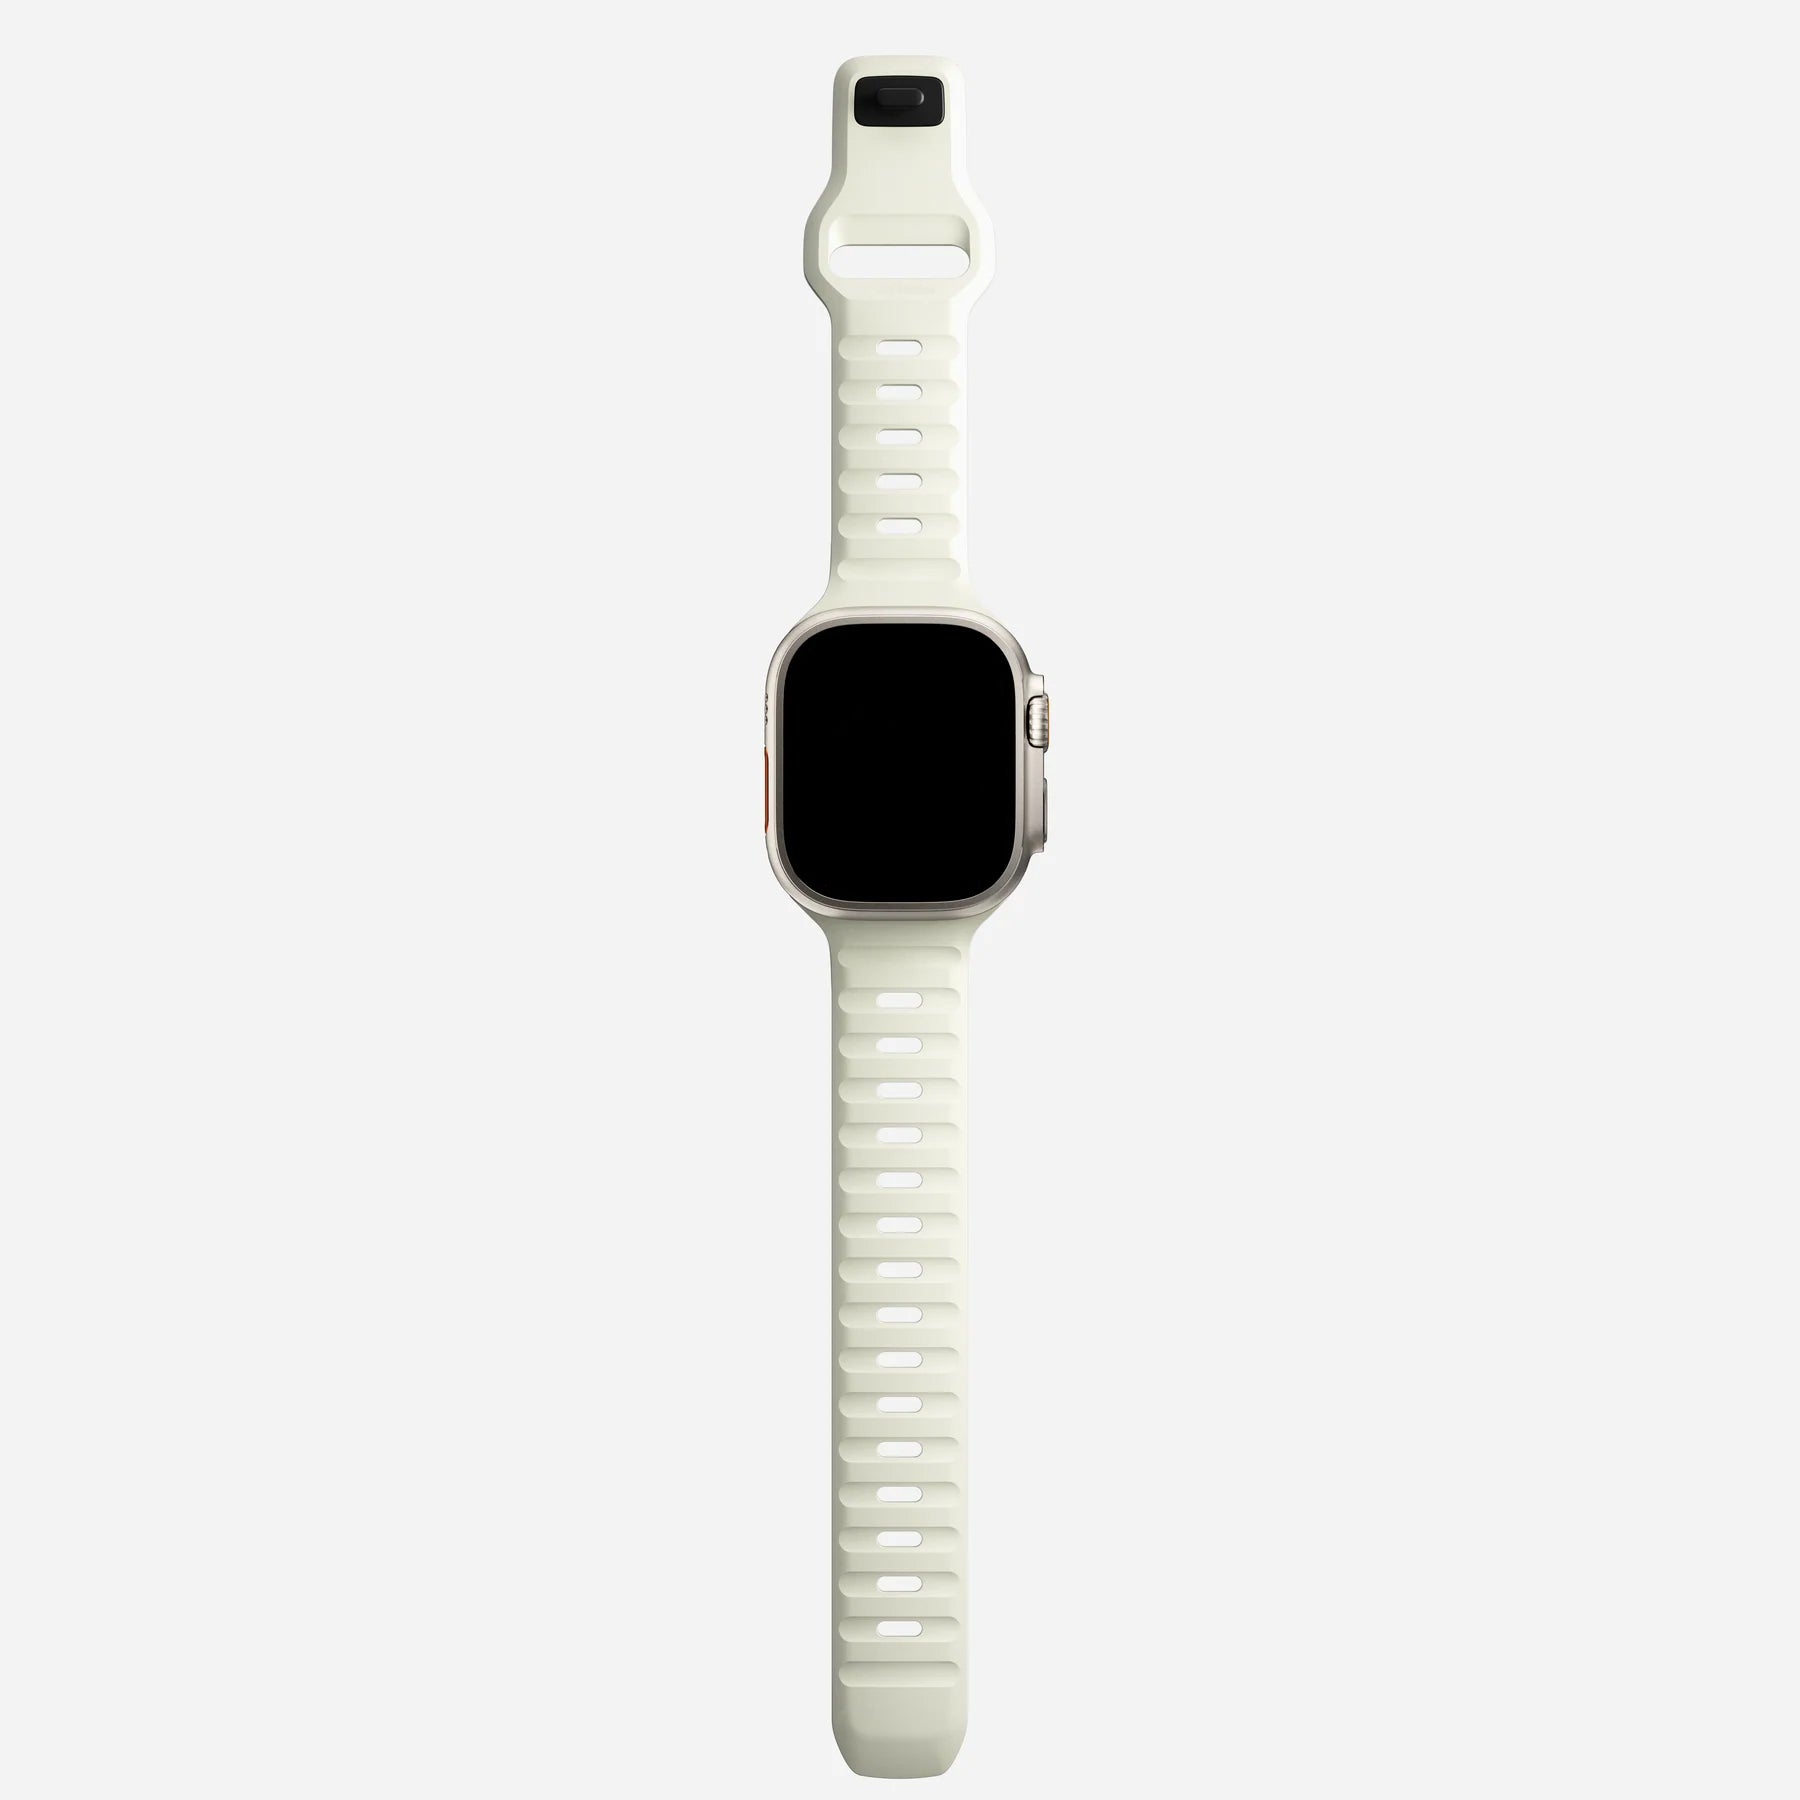 A unique glow in the dark colour silicon watch strap for apple watch ultra designed for sports and active activities